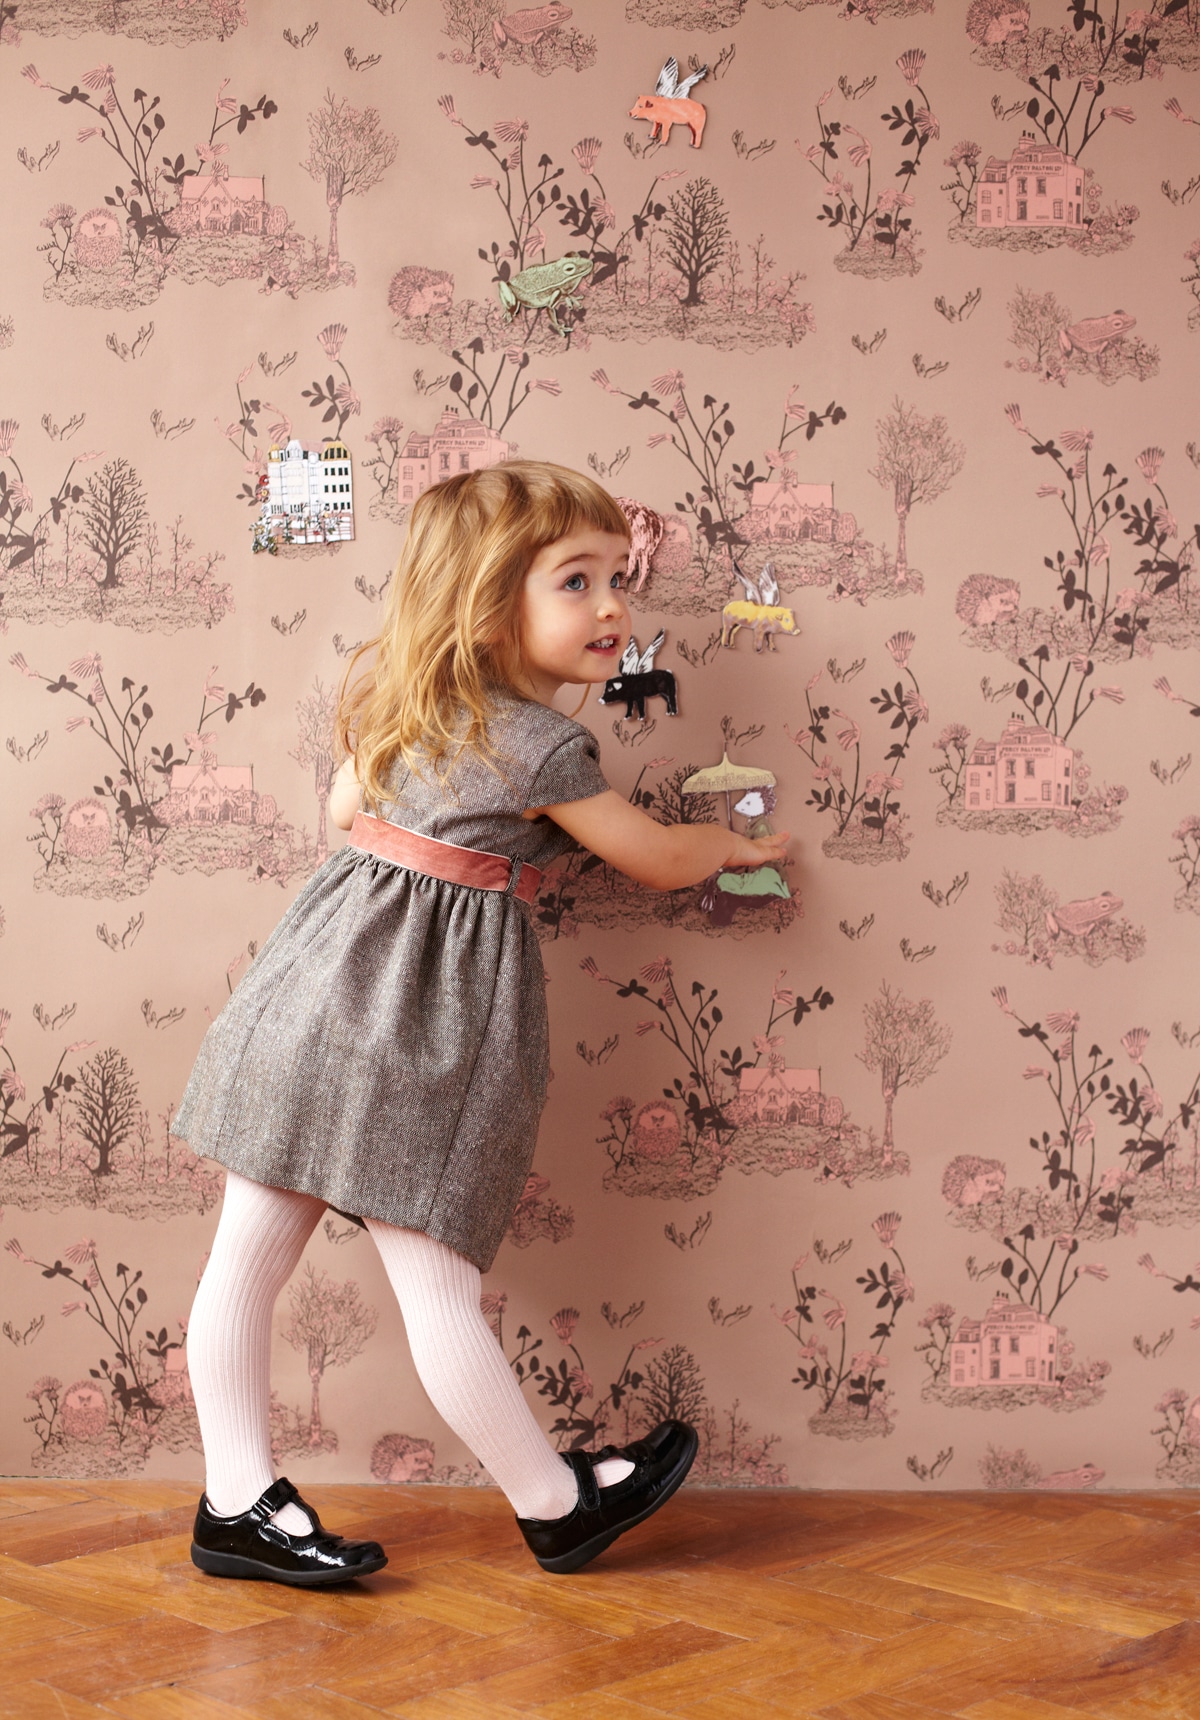 Magnetic Wallpaper Turns Ordinary Walls Into A Spontaneous